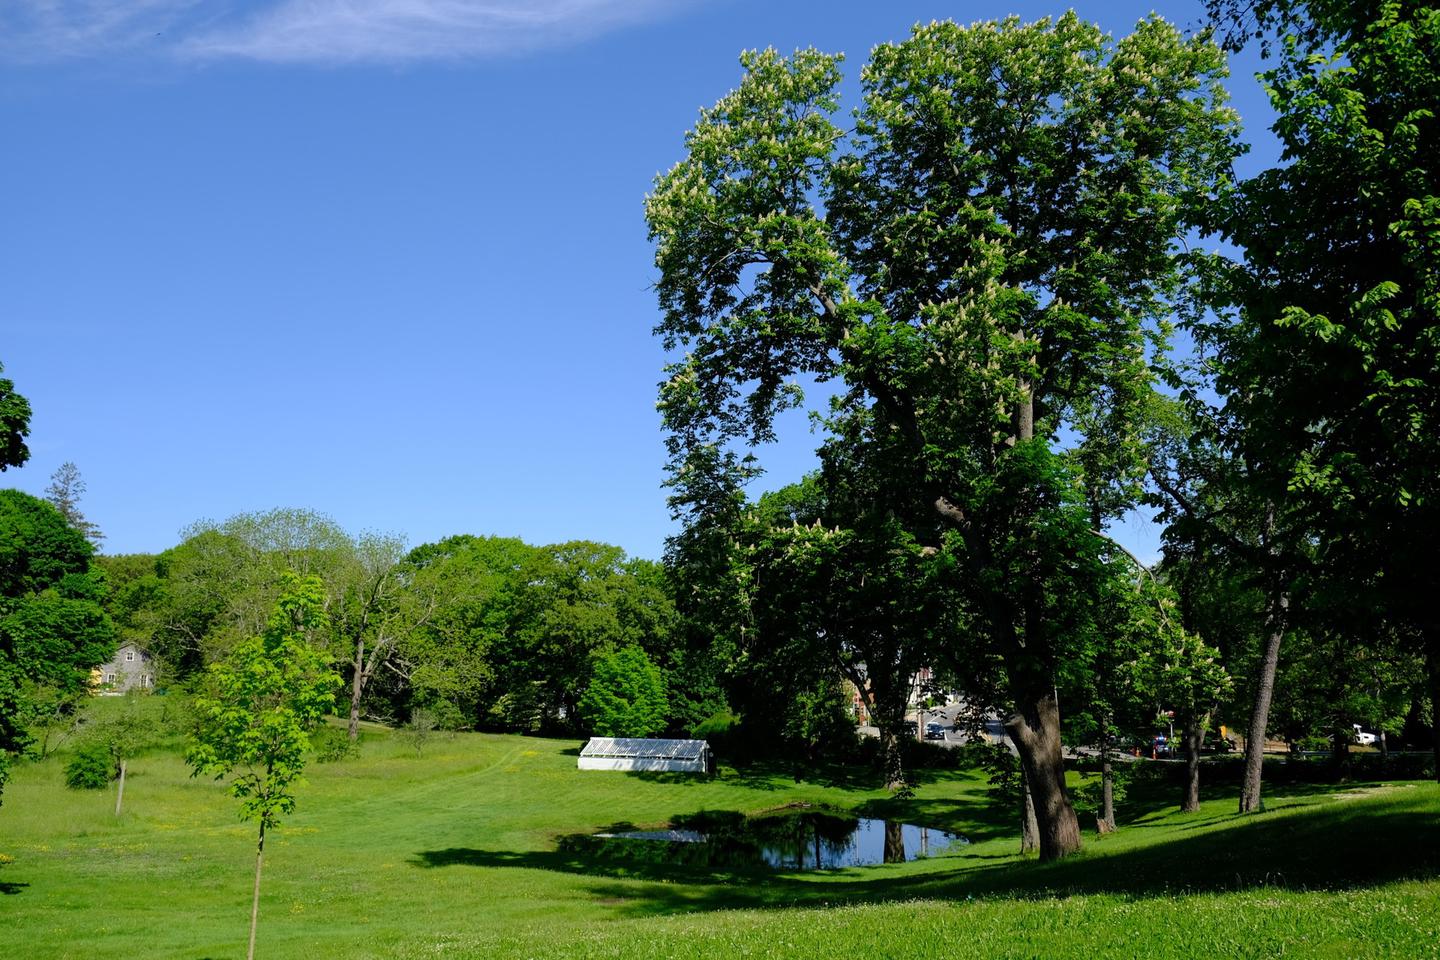 A grassy field surrounded by trees with a horse chestnut tree and small pond on the right and a white greenhouse in the background.The grounds of Peace field recall the rural character of the Adams family's farm and country estate. 